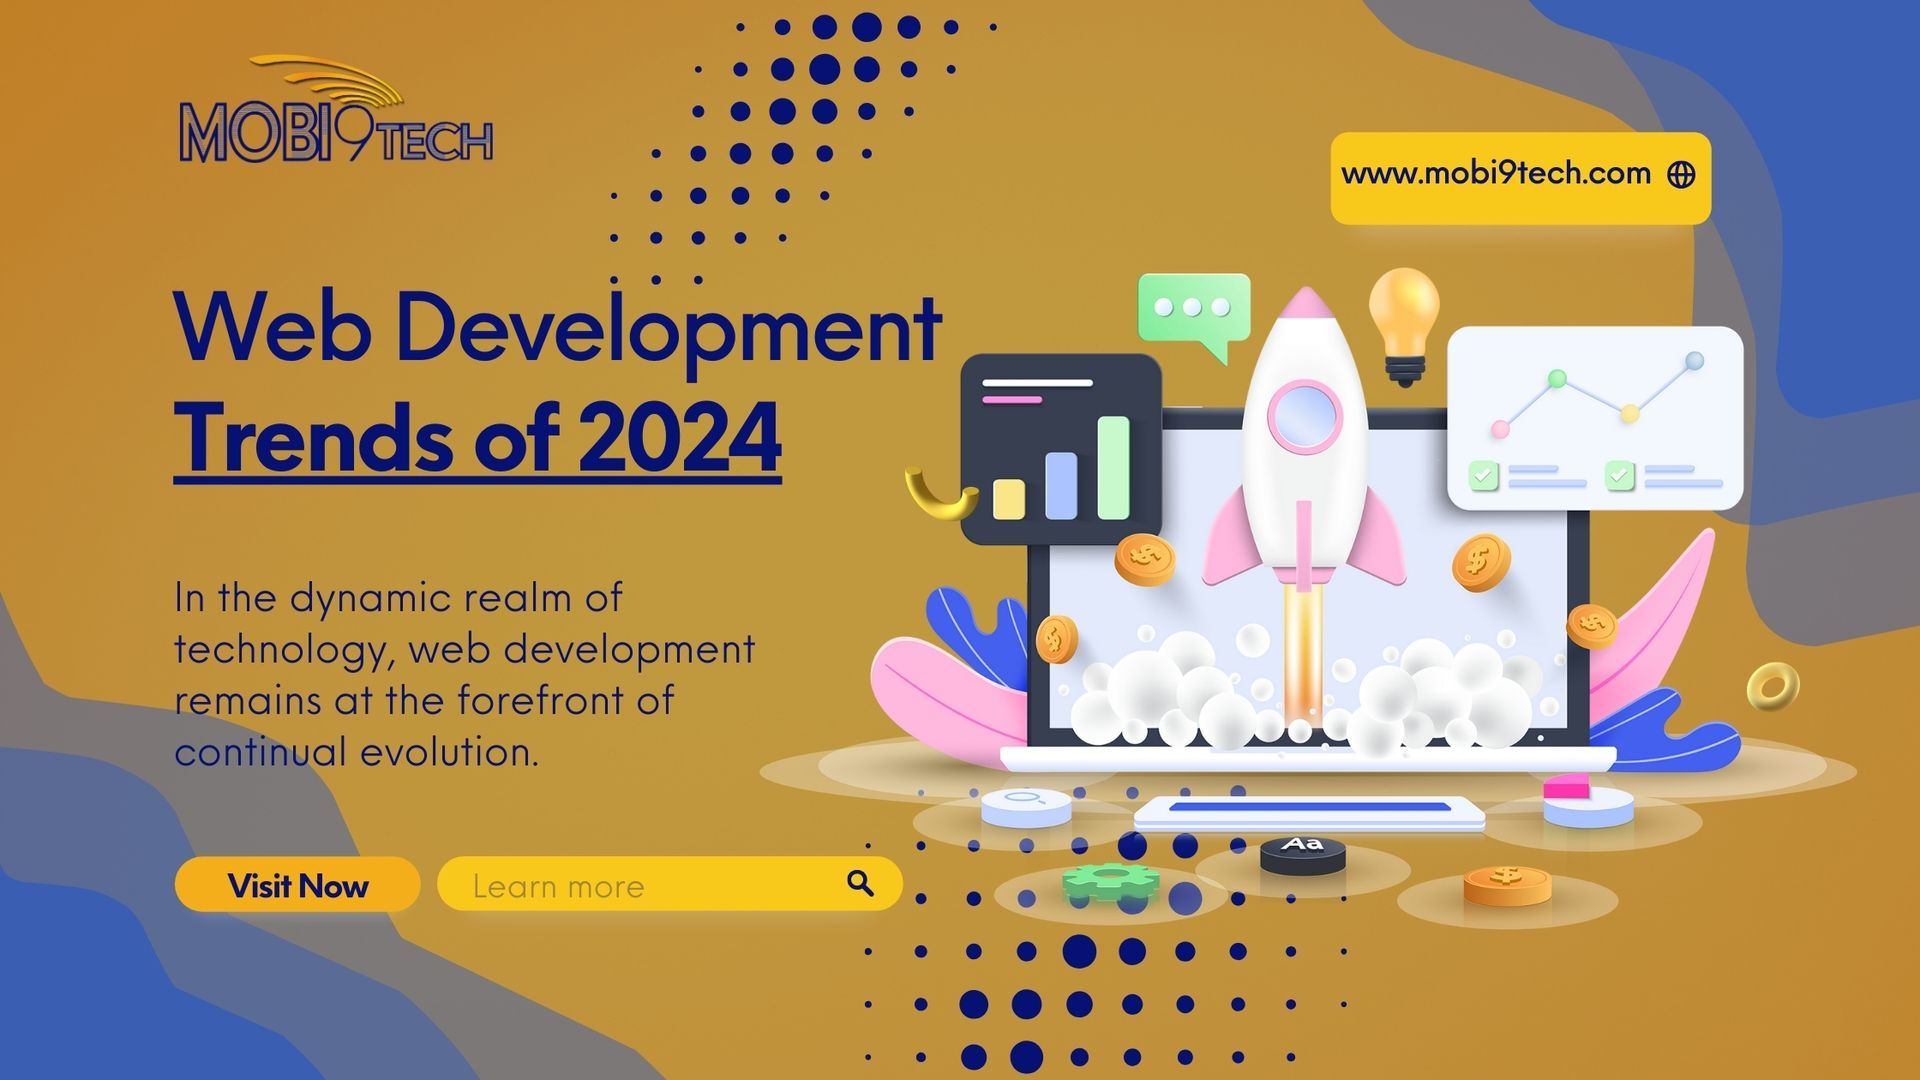 The Latest Trends in Web Development for 2024